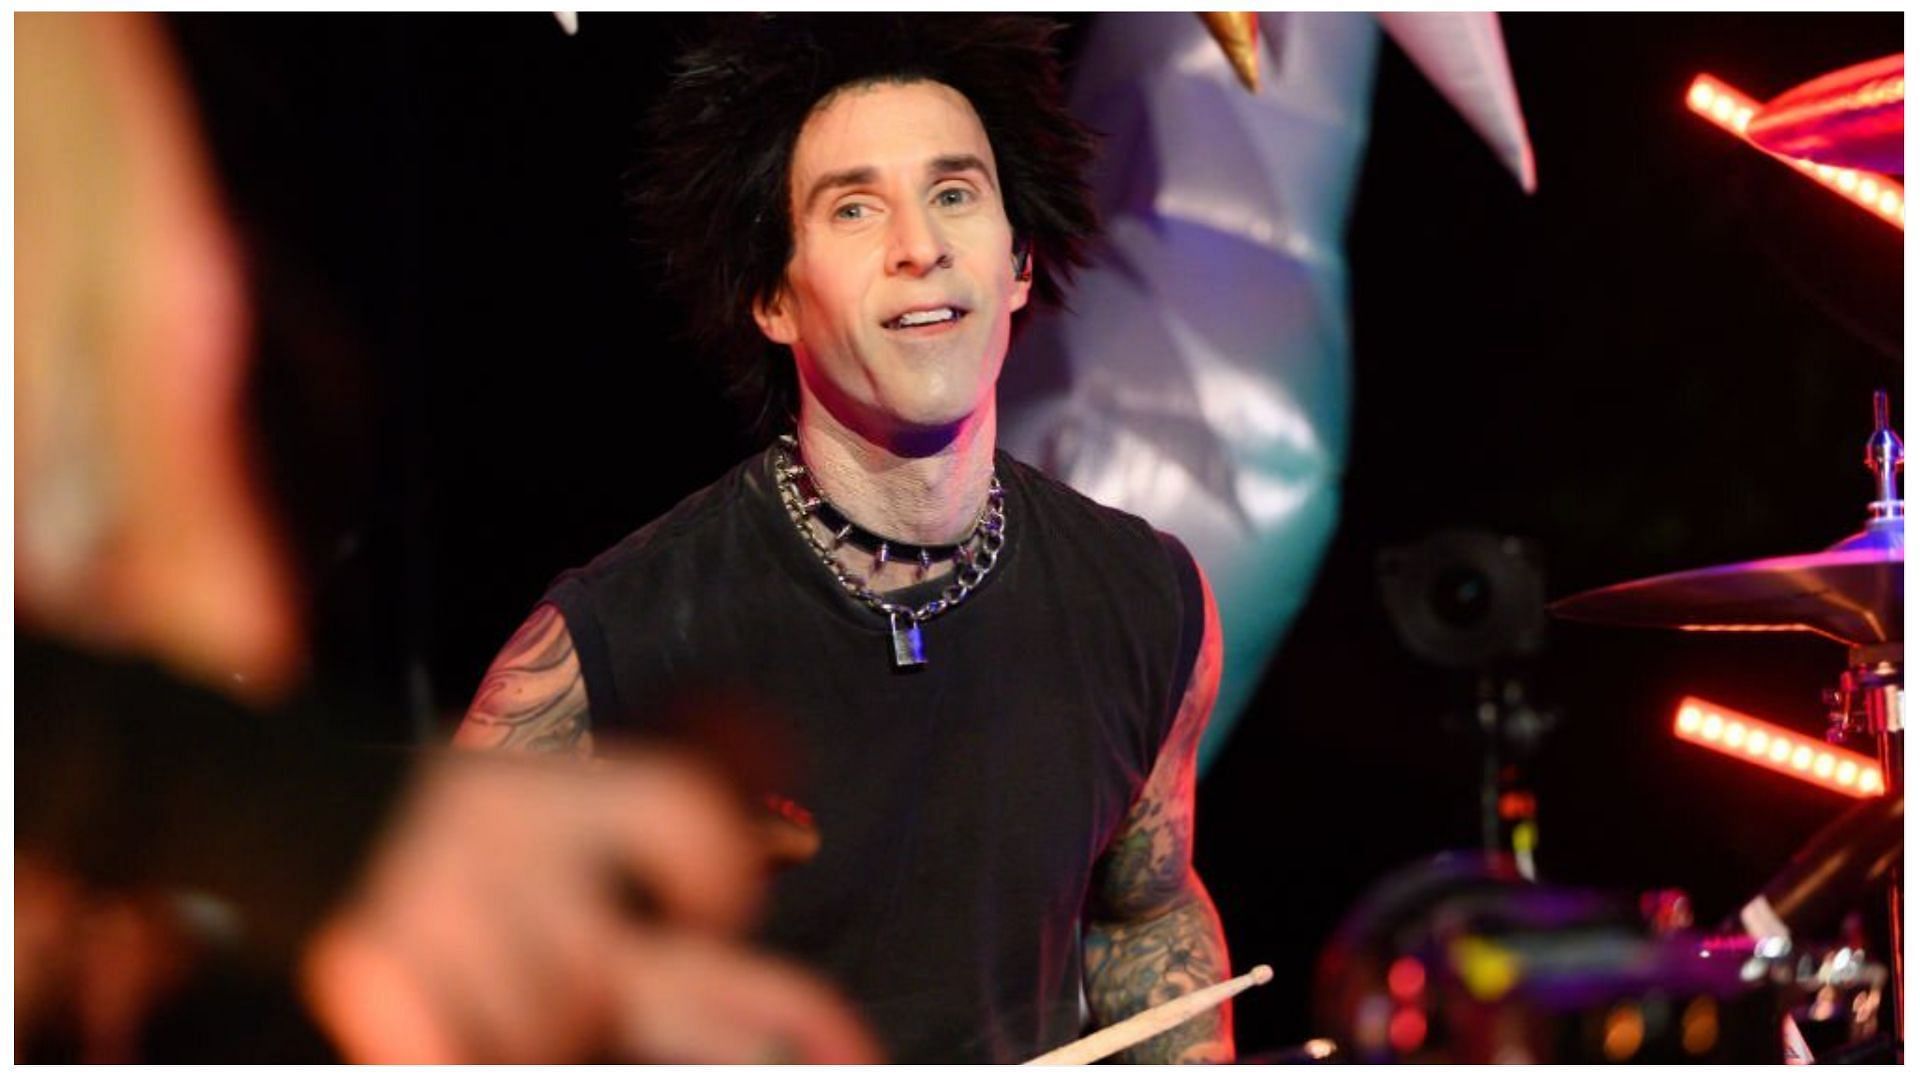 Travis Barker has been hospitalized due to some unknown health problems (Image via Scott Dudelson/Getty Images)